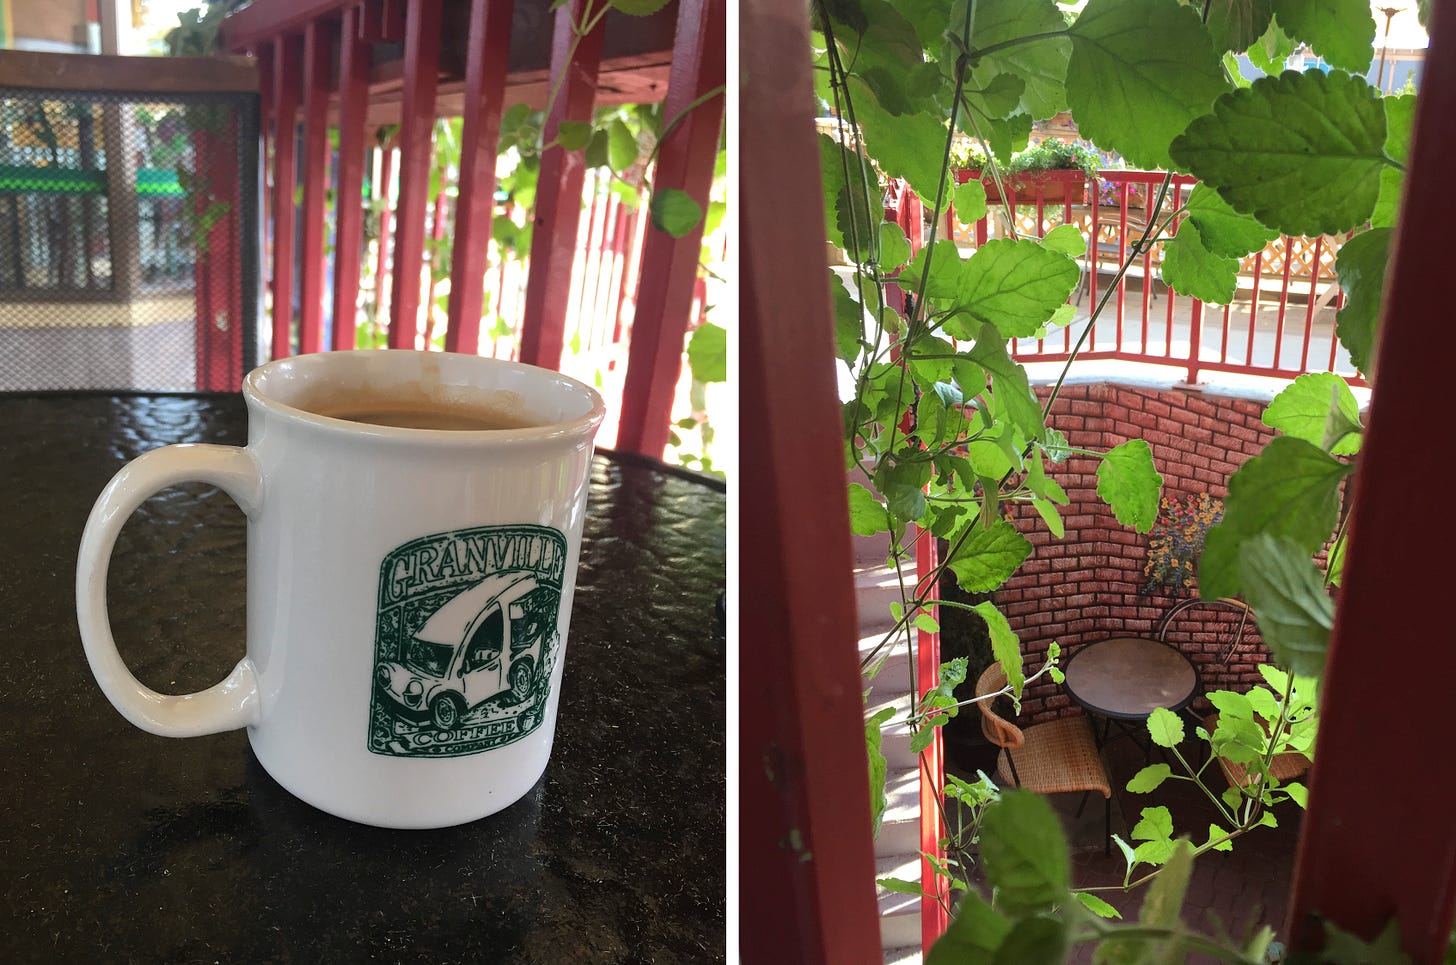 left image: a white coffee mug with a faded green logo for Granville's coffee. Right image: taken through red balcony posts and trailing green plant leaves, a round patio table with two chairs in an alcove below, and a painted brick wall in the back ground.